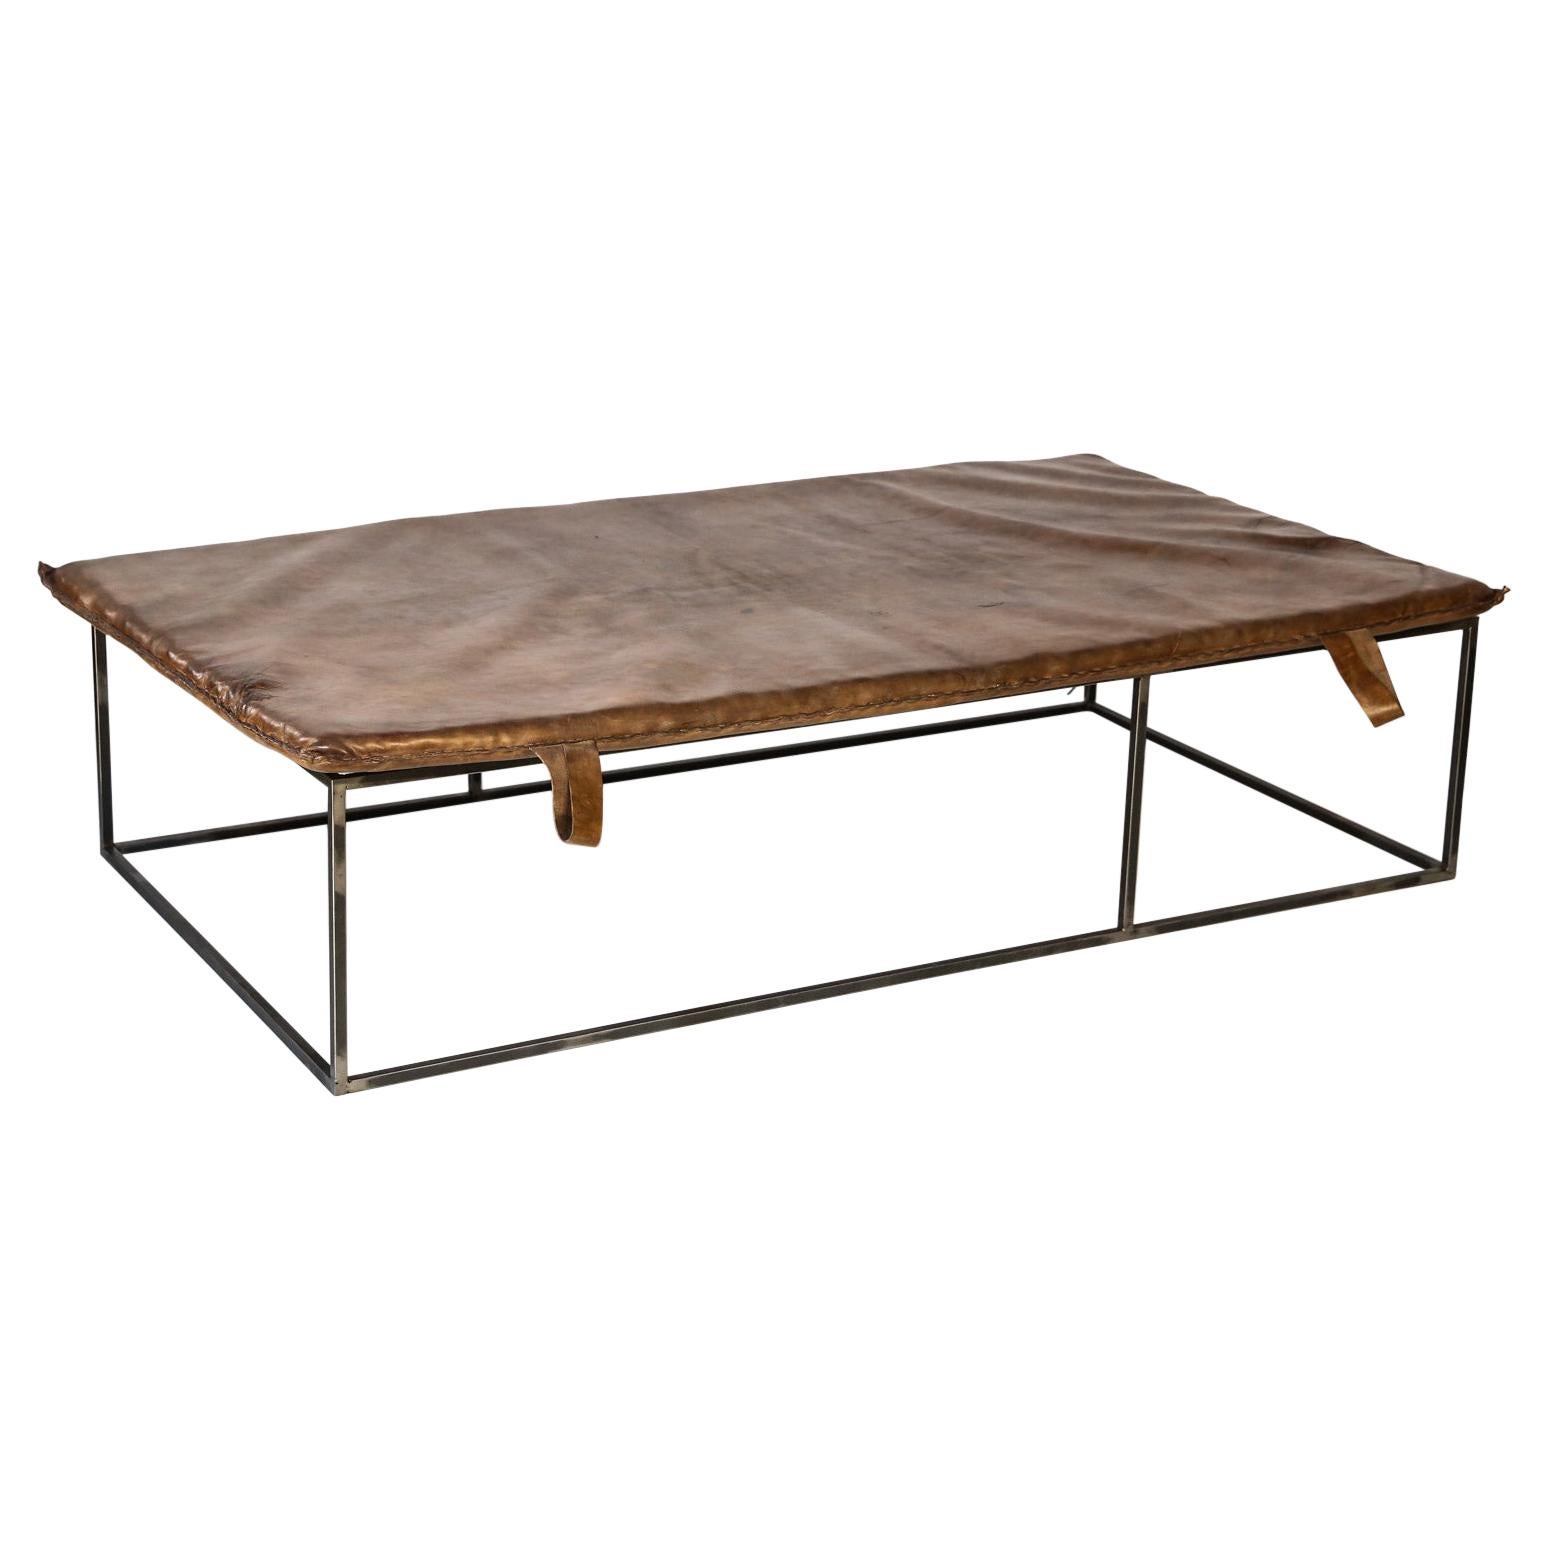 Midcentury Gymnasium Mat Daybed/Table